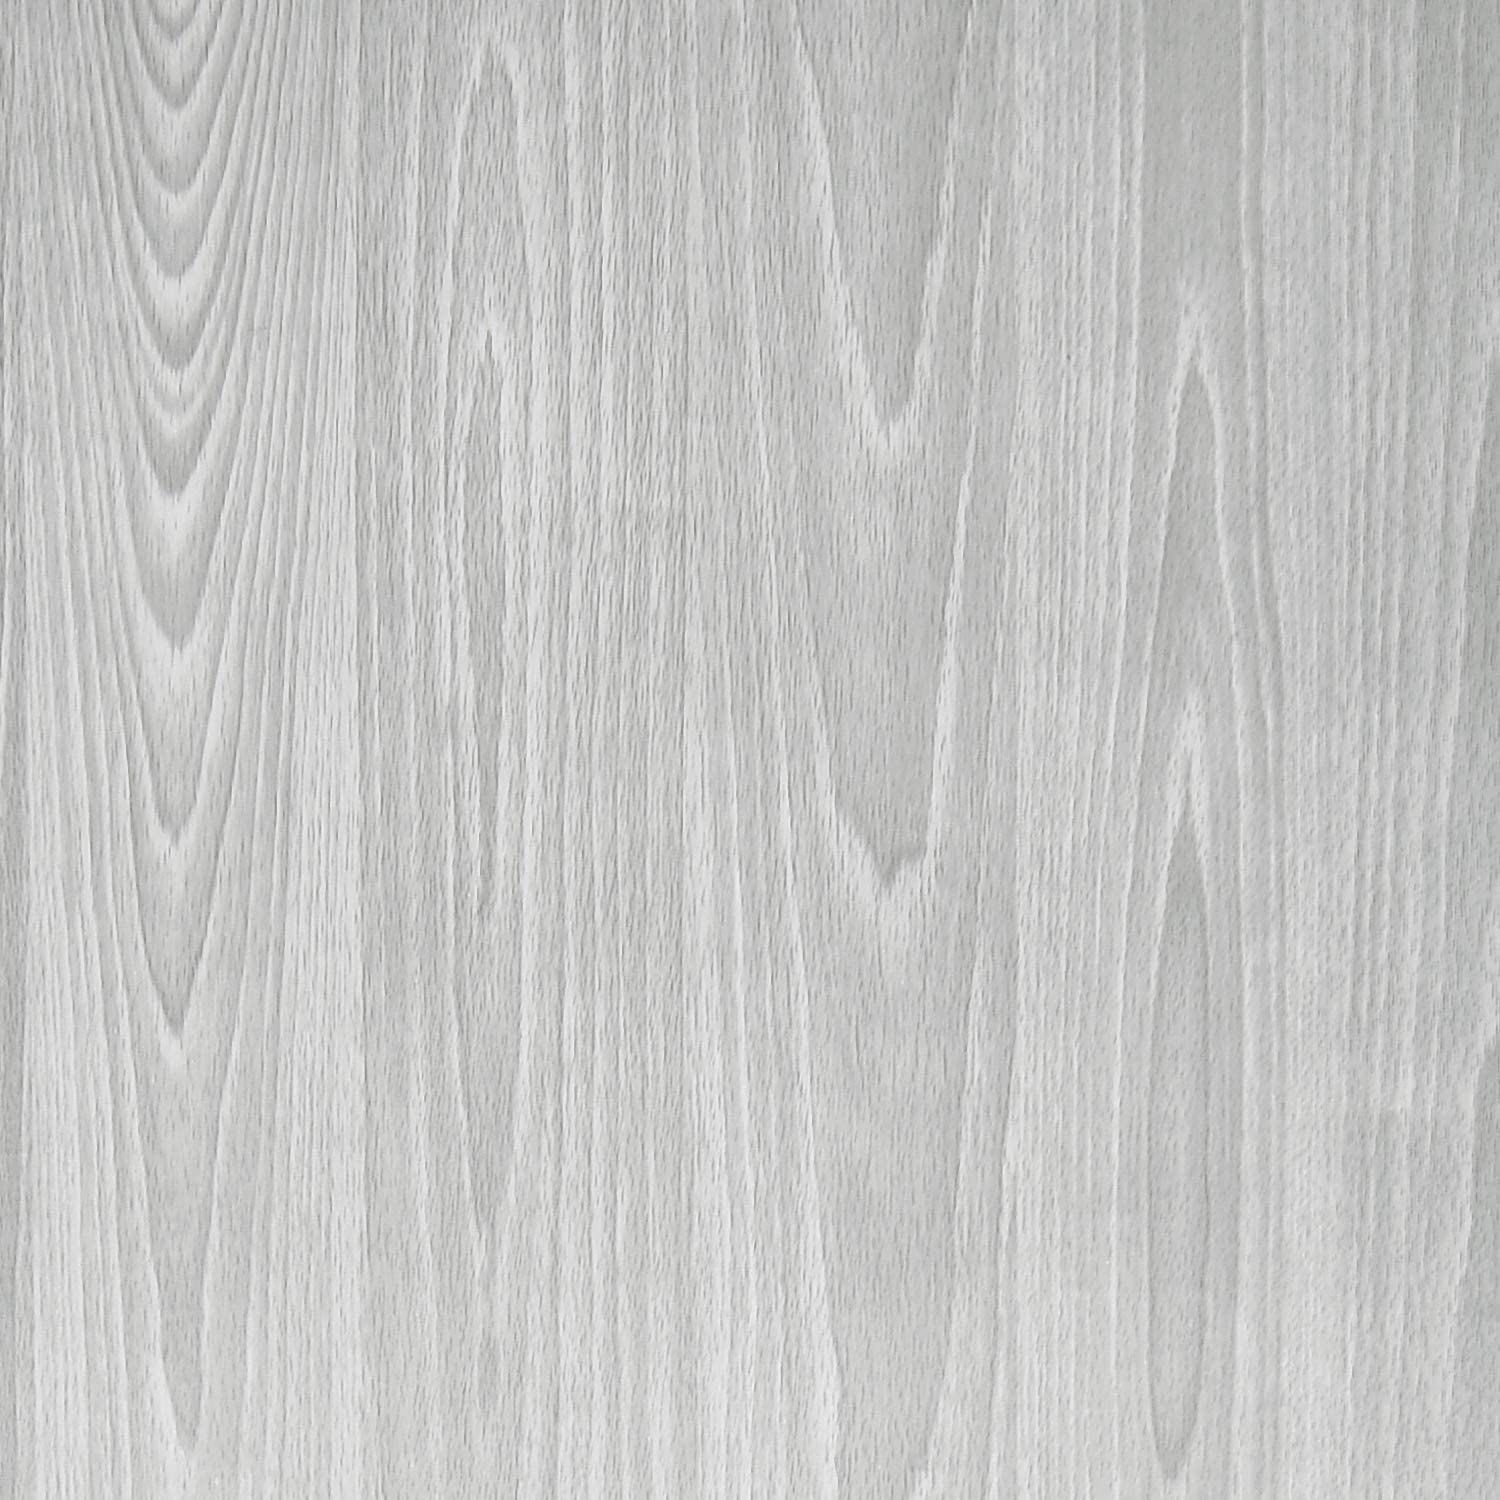 Buy Melwod Gray Wood Contact Paper 17.7 x 118 Inch Wood Grain Texture Peel and Stick Wallpaper Adhesive Paper Light Grey Wall Covering Desk Shelf Drawer Liner Cabinets Wardrobe Online in Indonesia. B086PHXRDQ